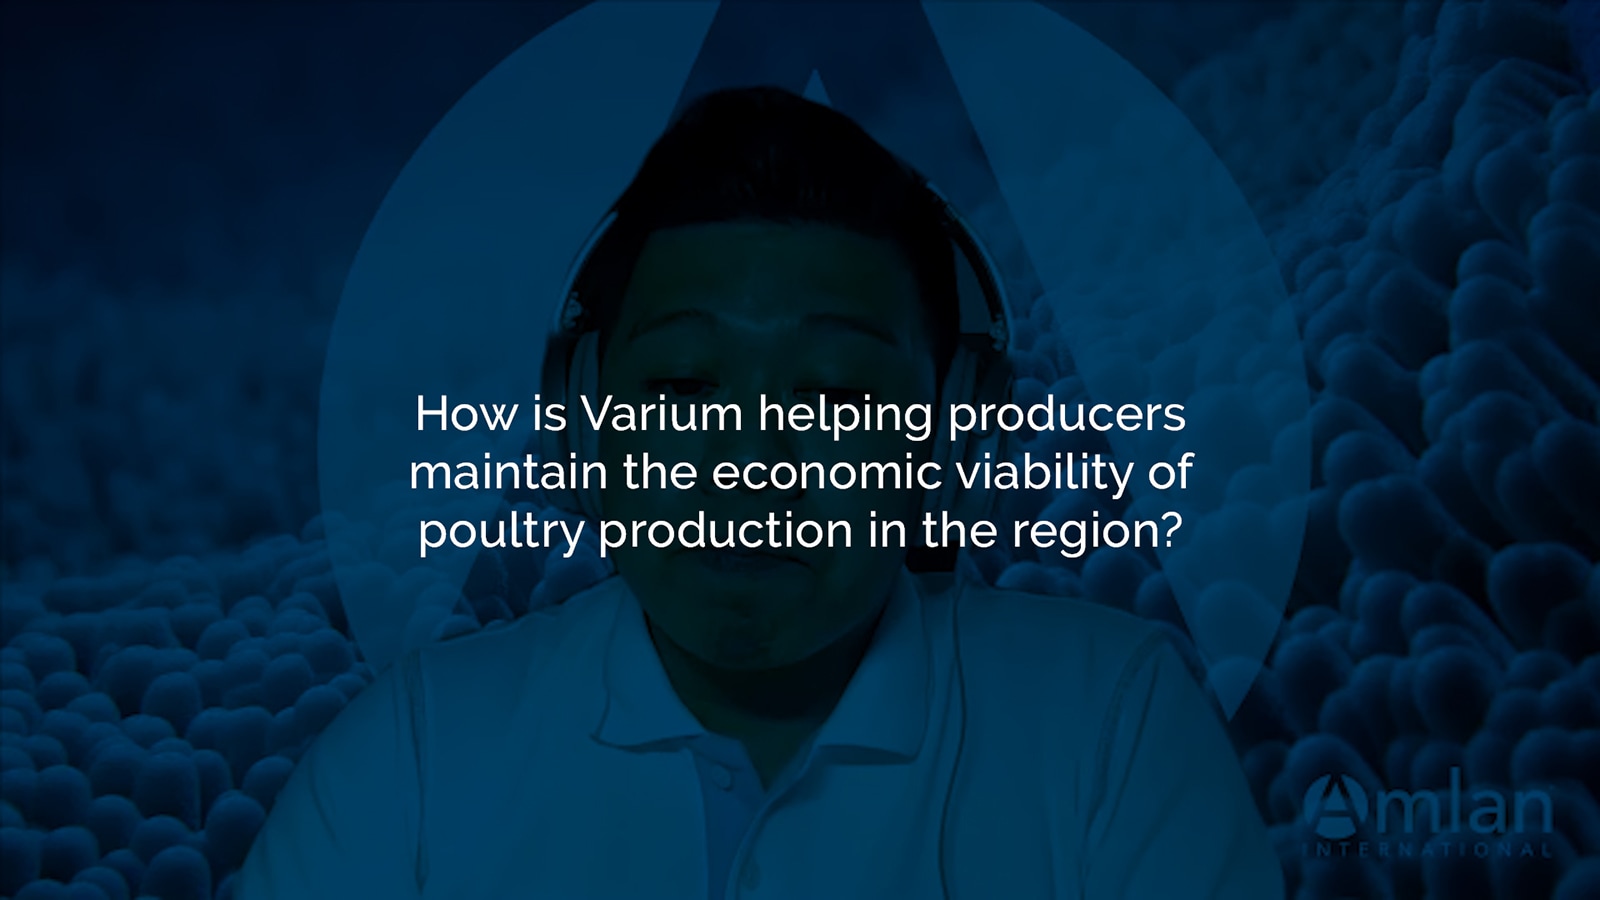 How is Varium helping producers maintain economic viability of poultry production in the region?